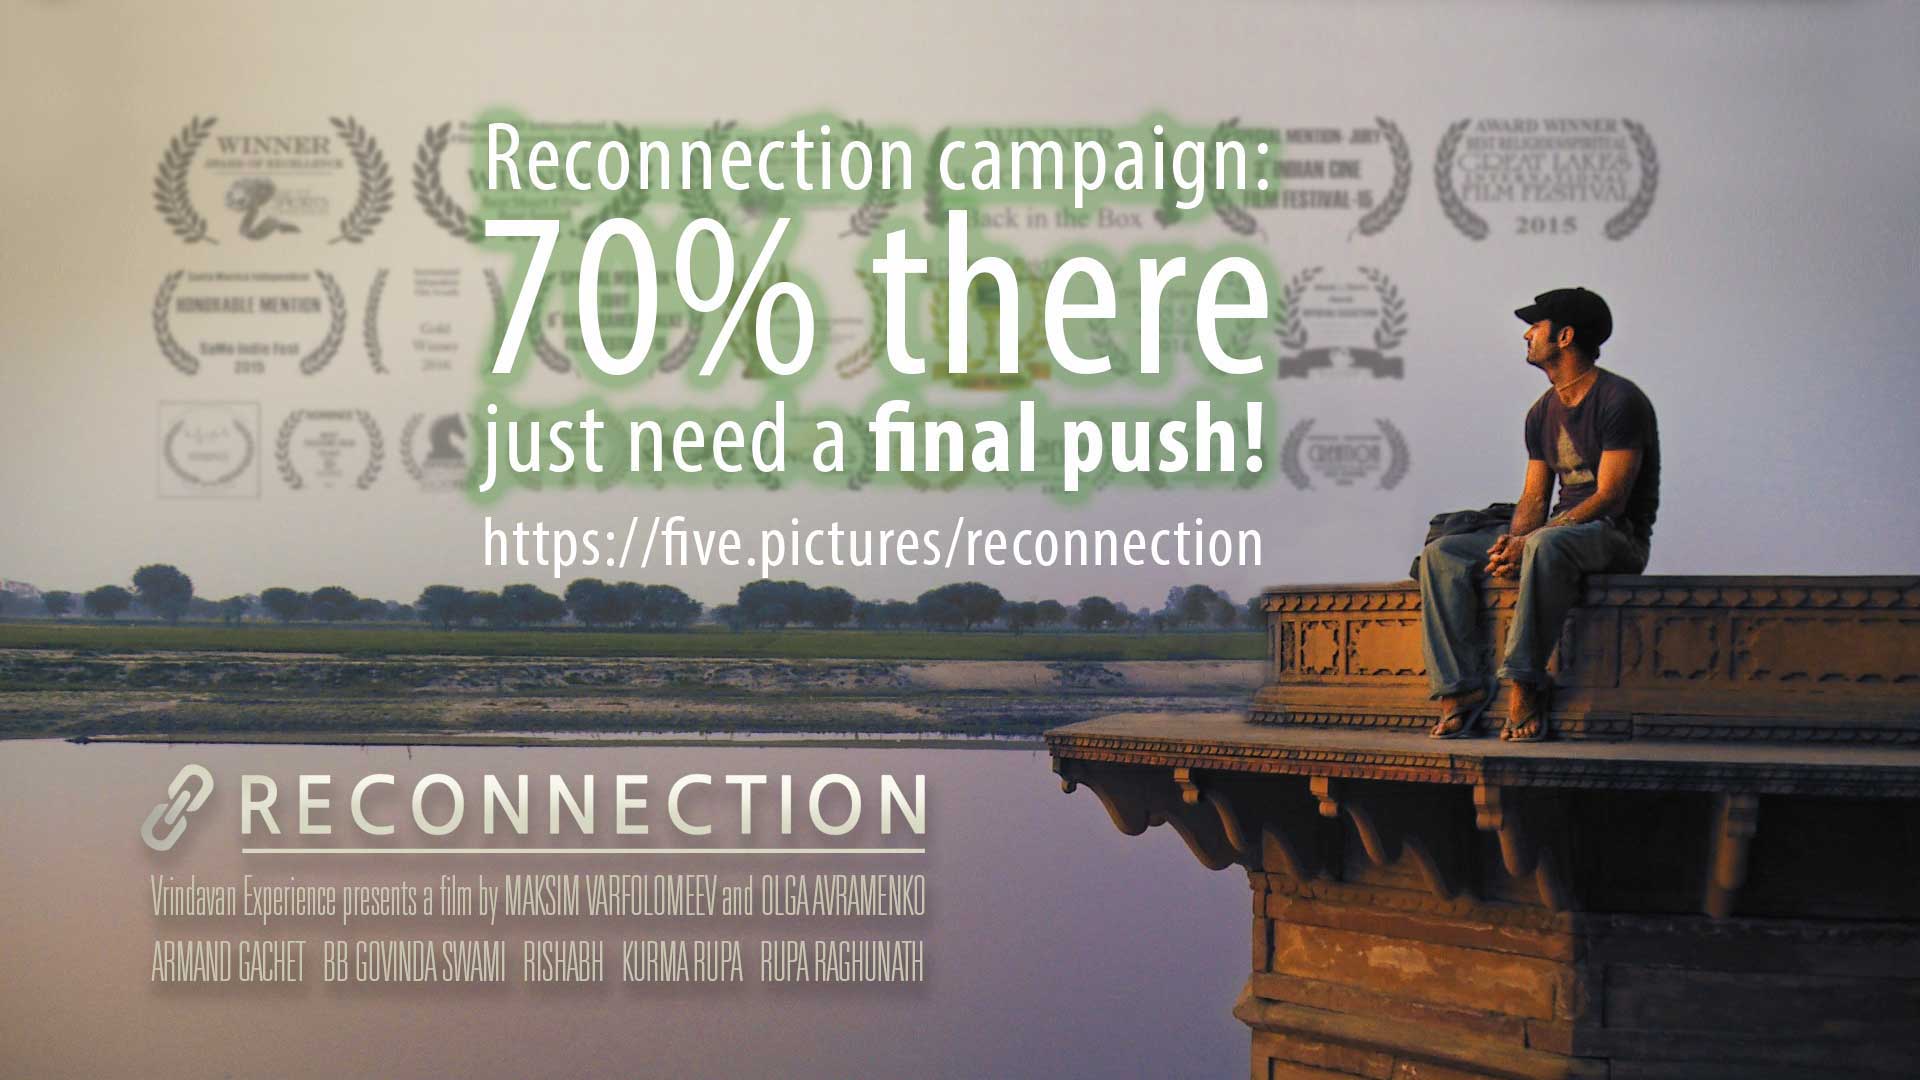 Featured image for “Reconnection campaign: 70% there, just need a final push!”